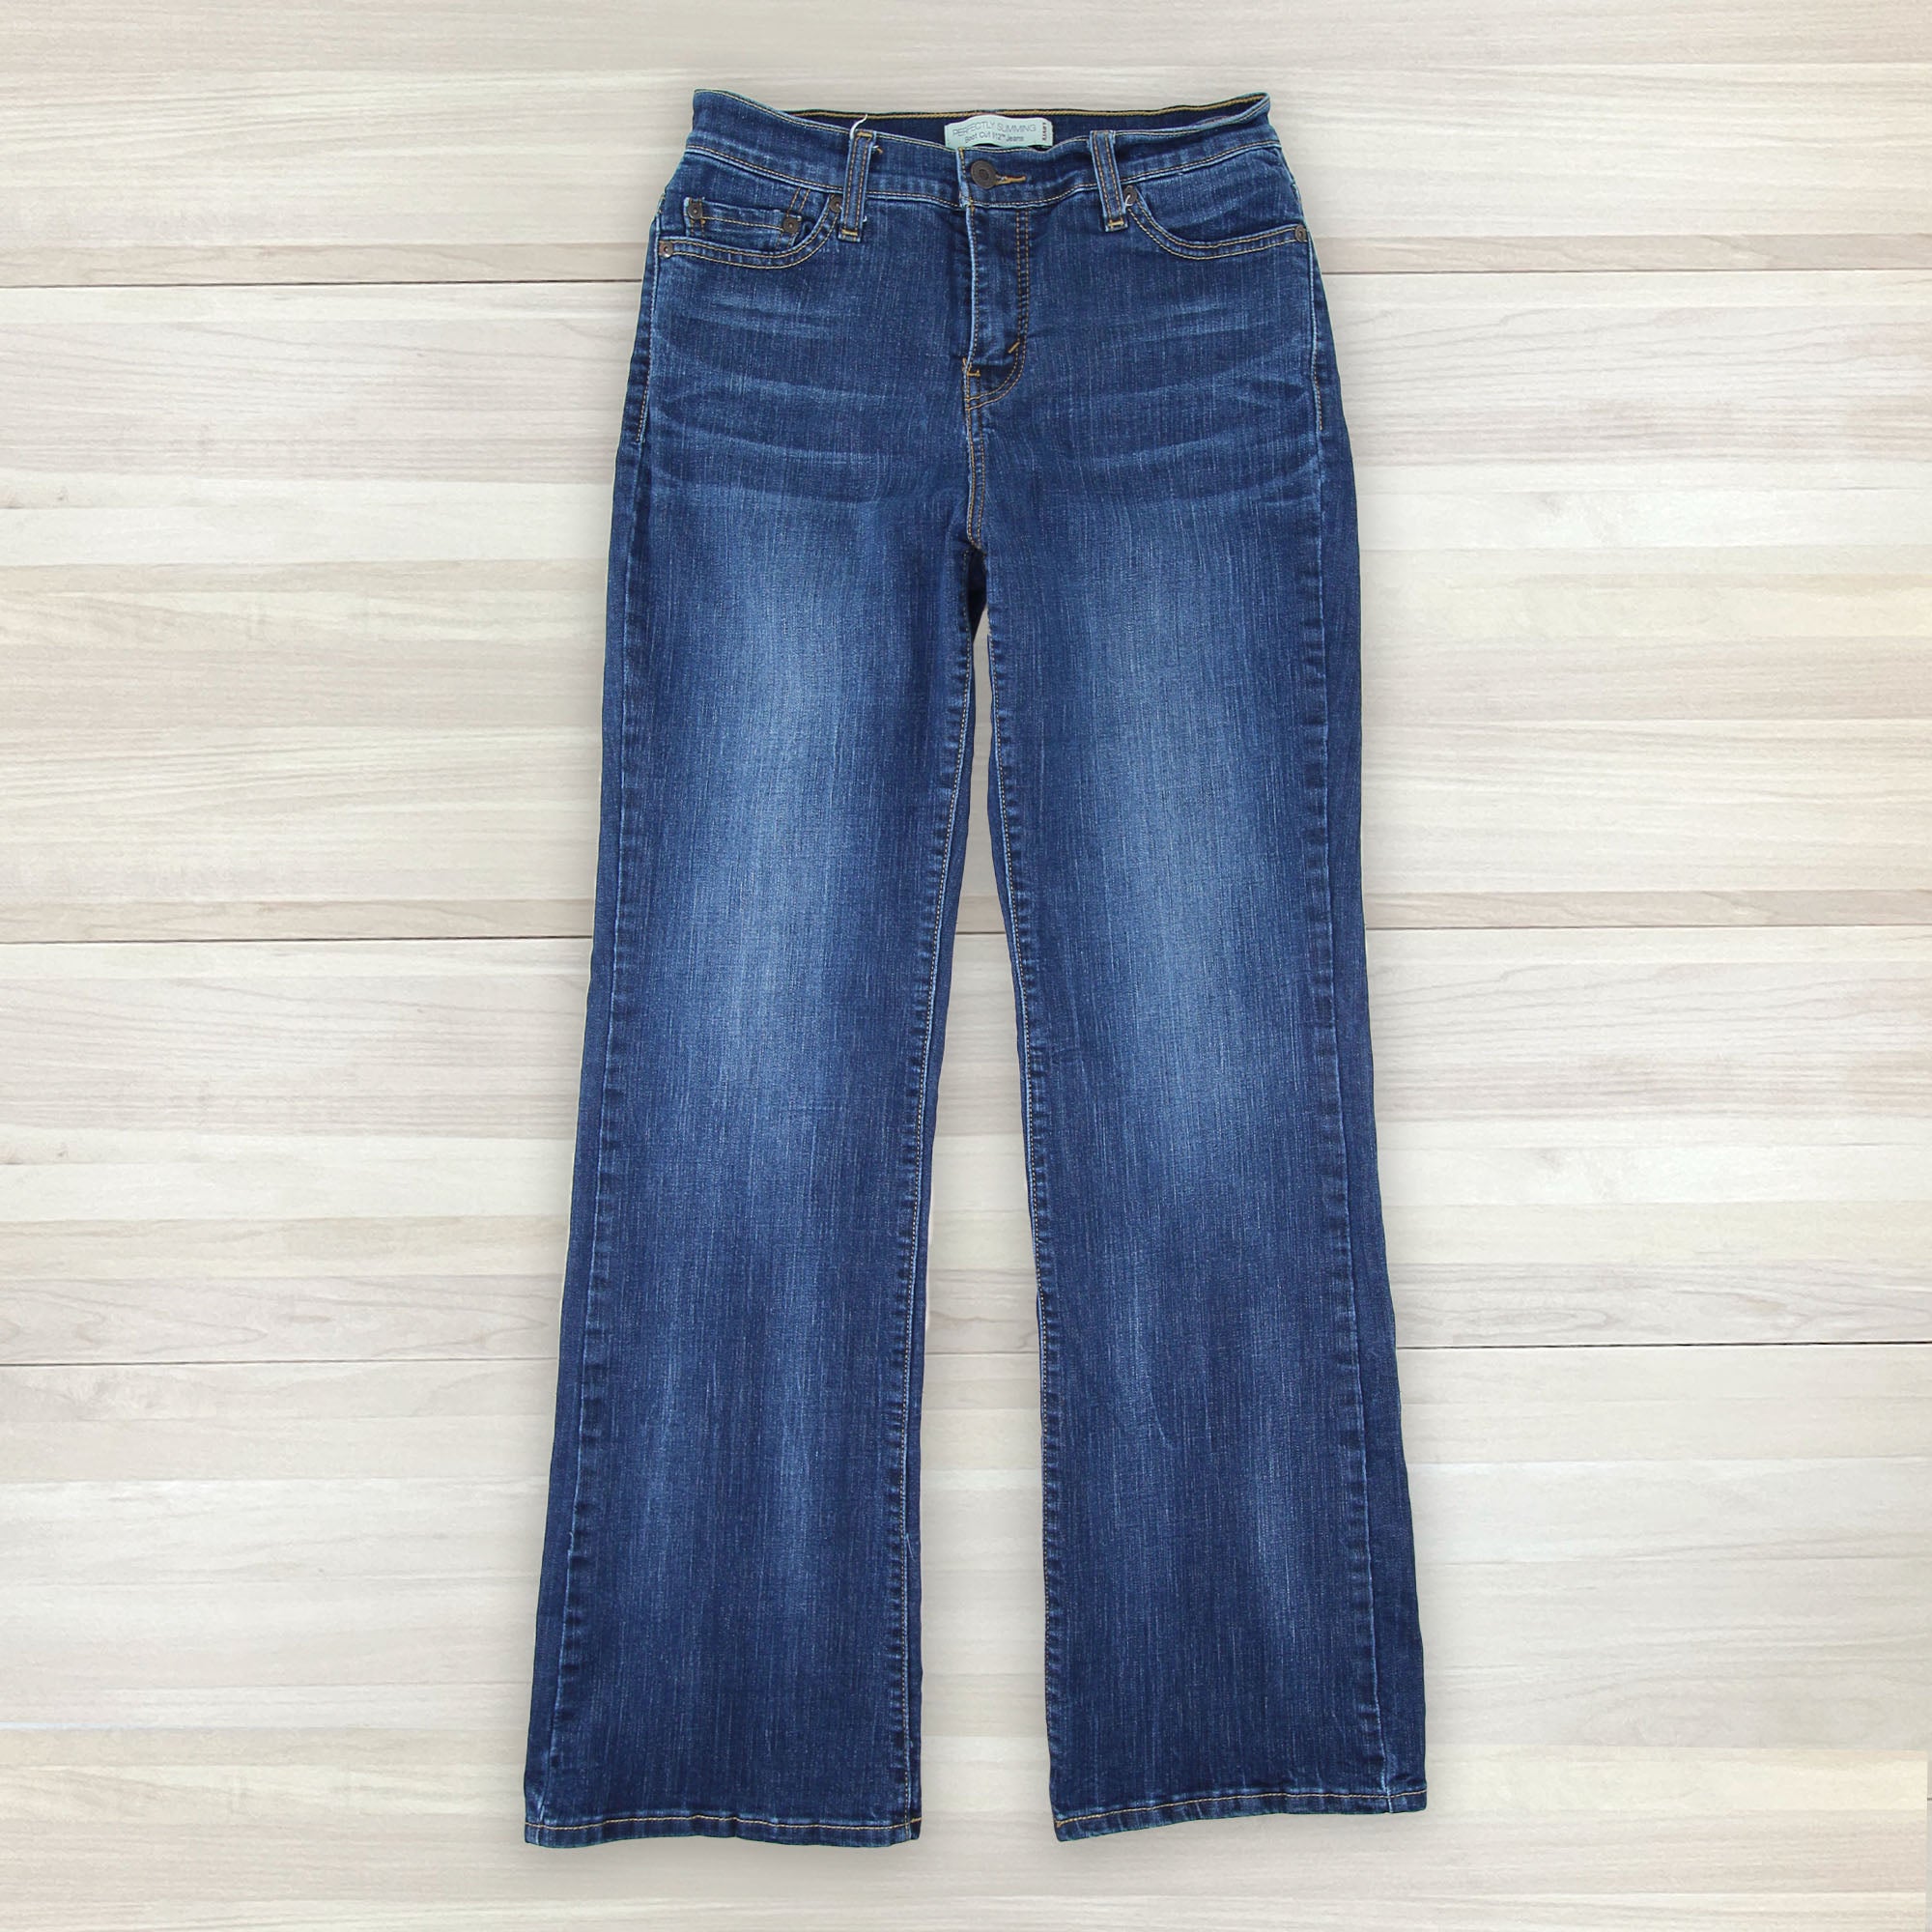 Women's Levi's 512 Perfectly Slimming Boot Cut - Size 10 Great Lakes Reclaimed Denim